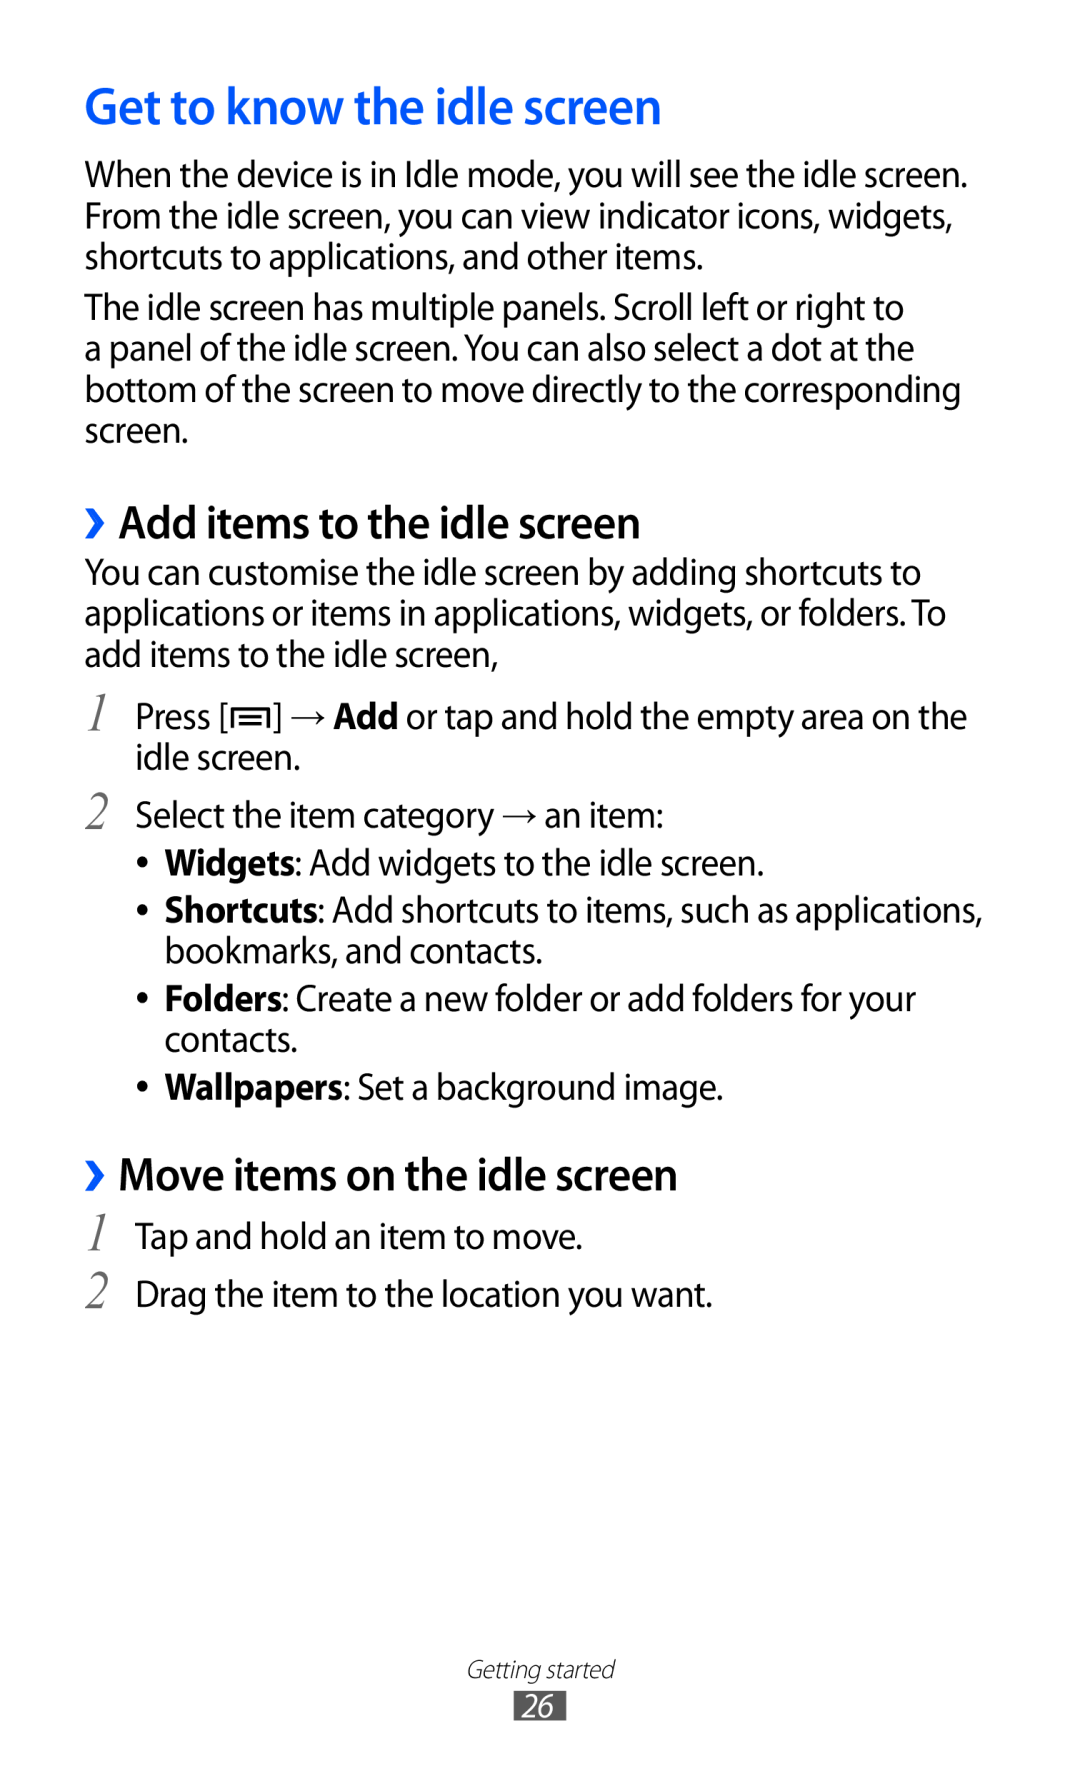 Samsung GT-I9070 user manual Get to know the idle screen, ››Add items to the idle screen, ››Move items on the idle screen 